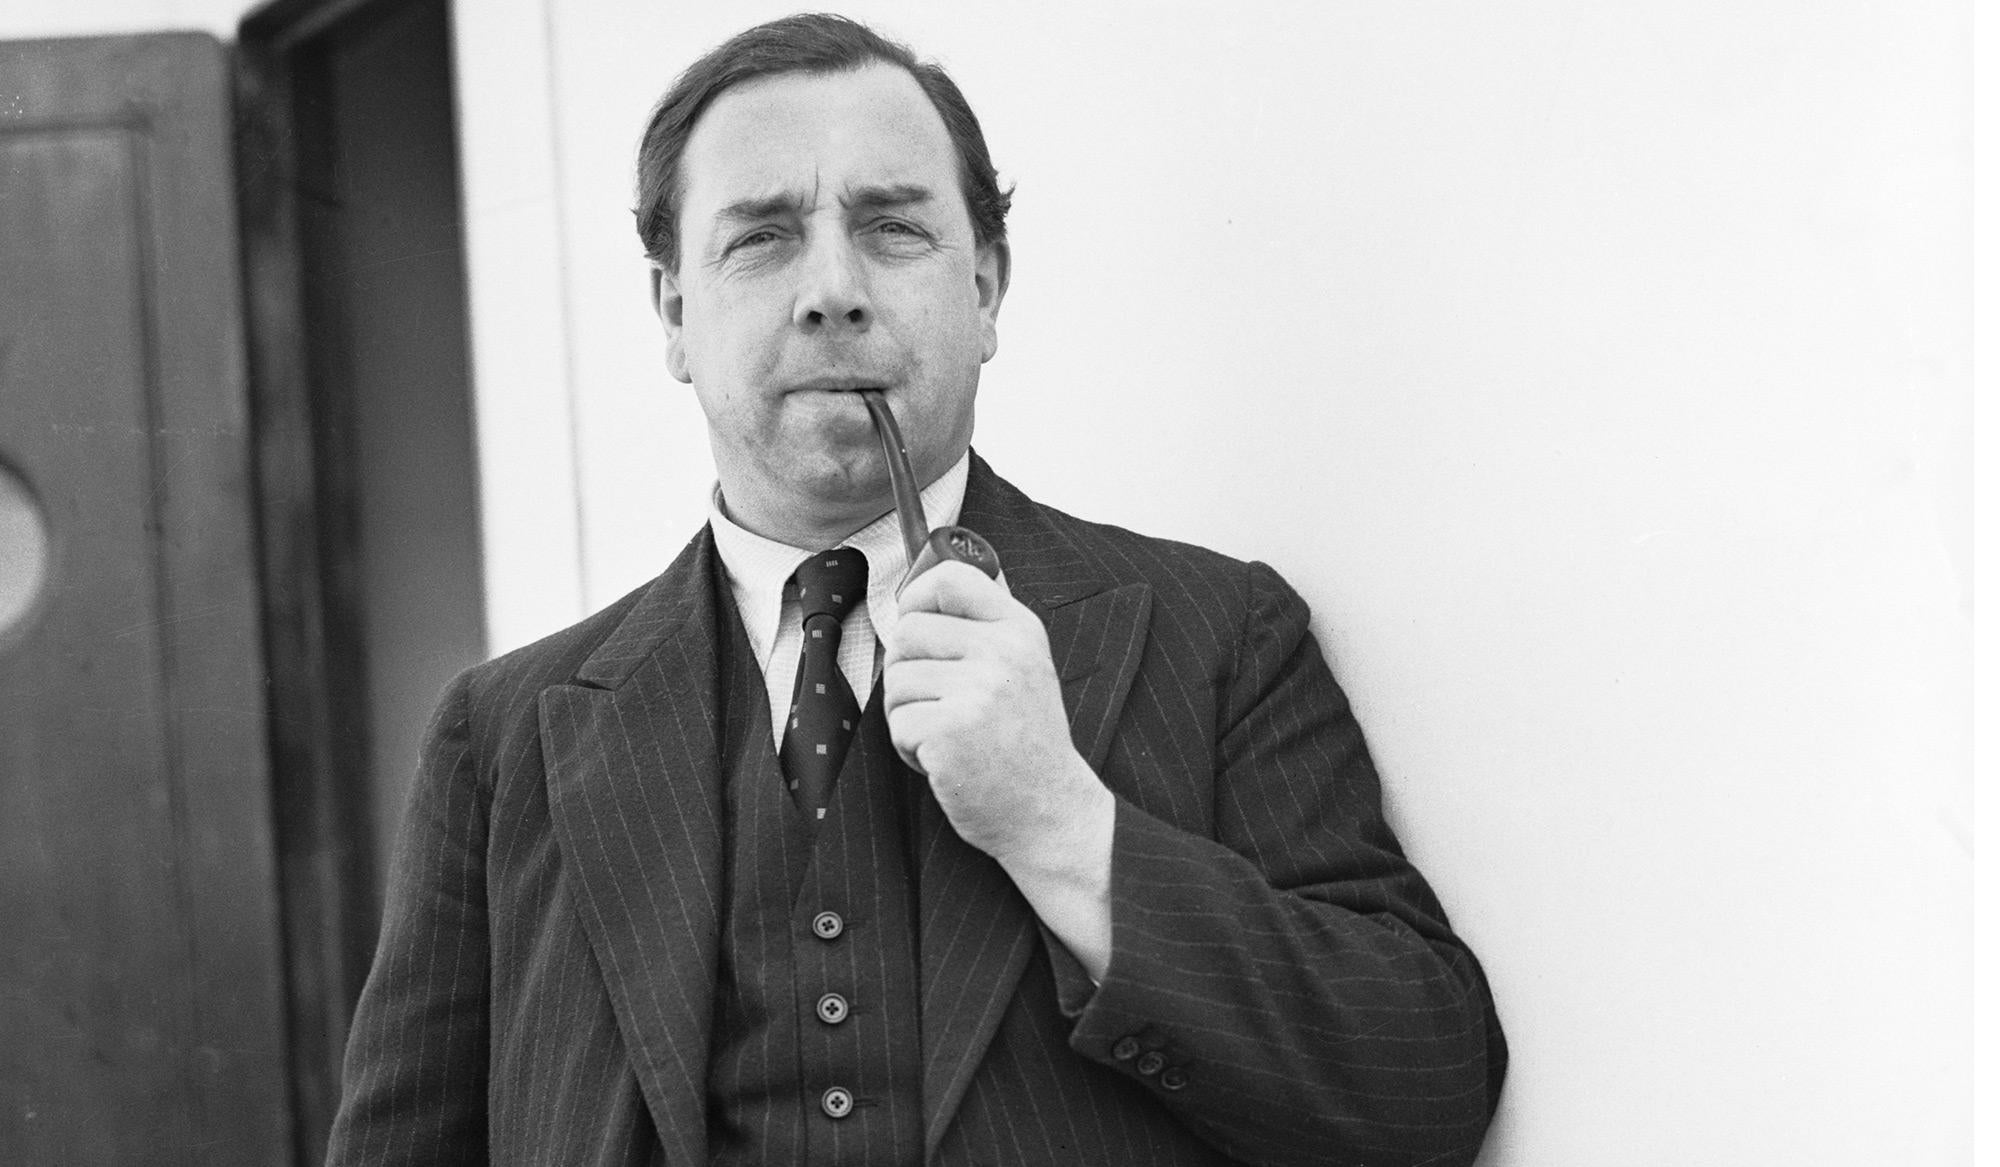 JB Priestley was extremely conscious of time, and many of his works link past, present and future